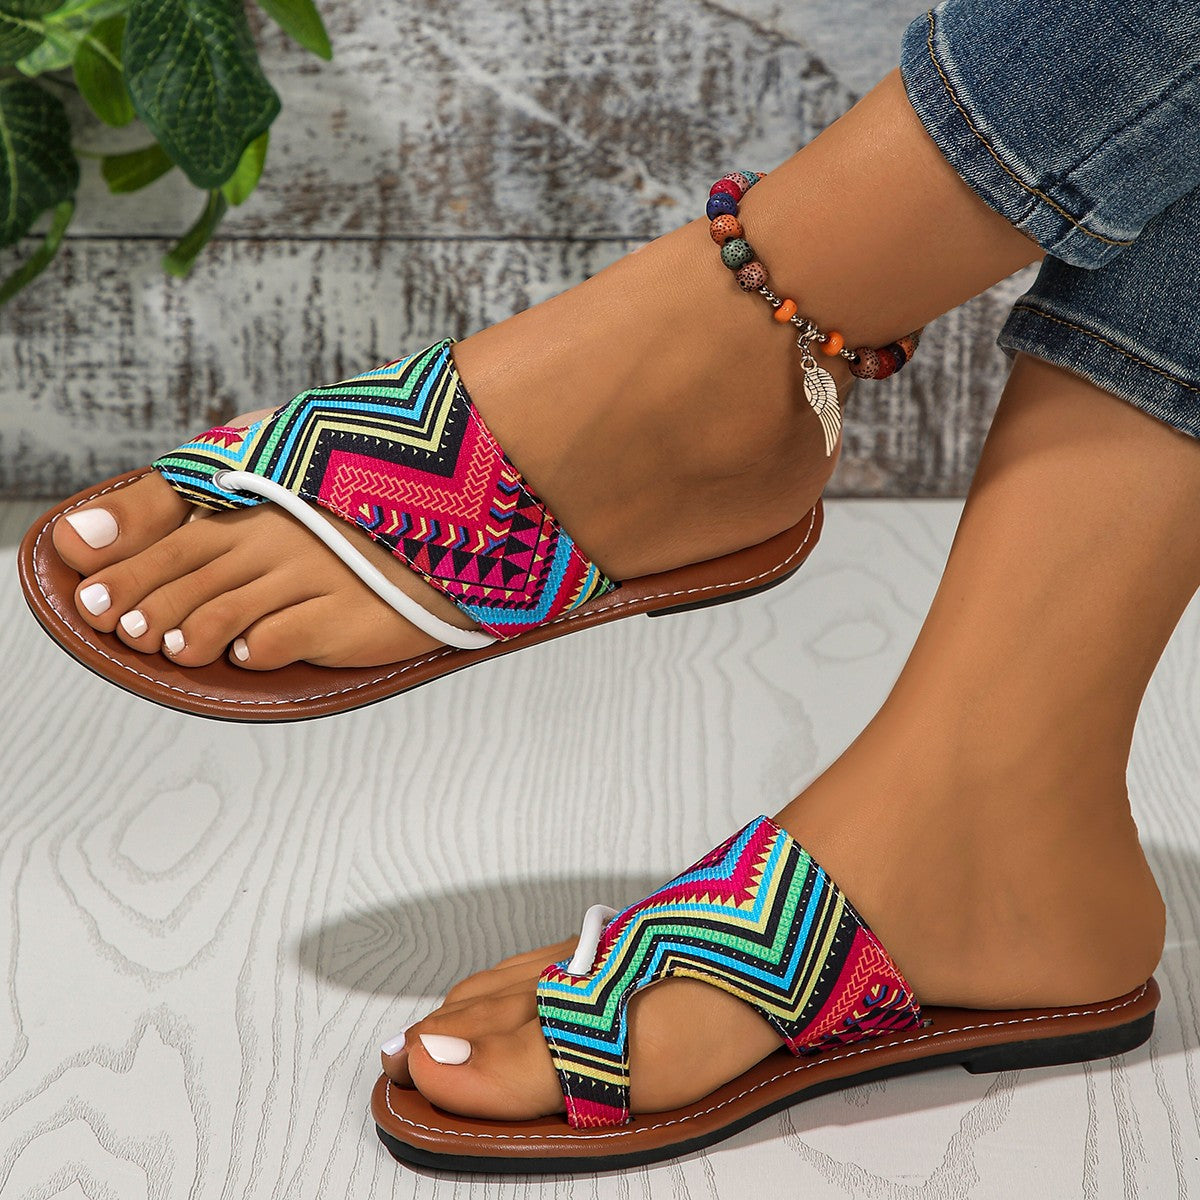 Women's Breathable Printed Toe Covering Plus Size Sandals